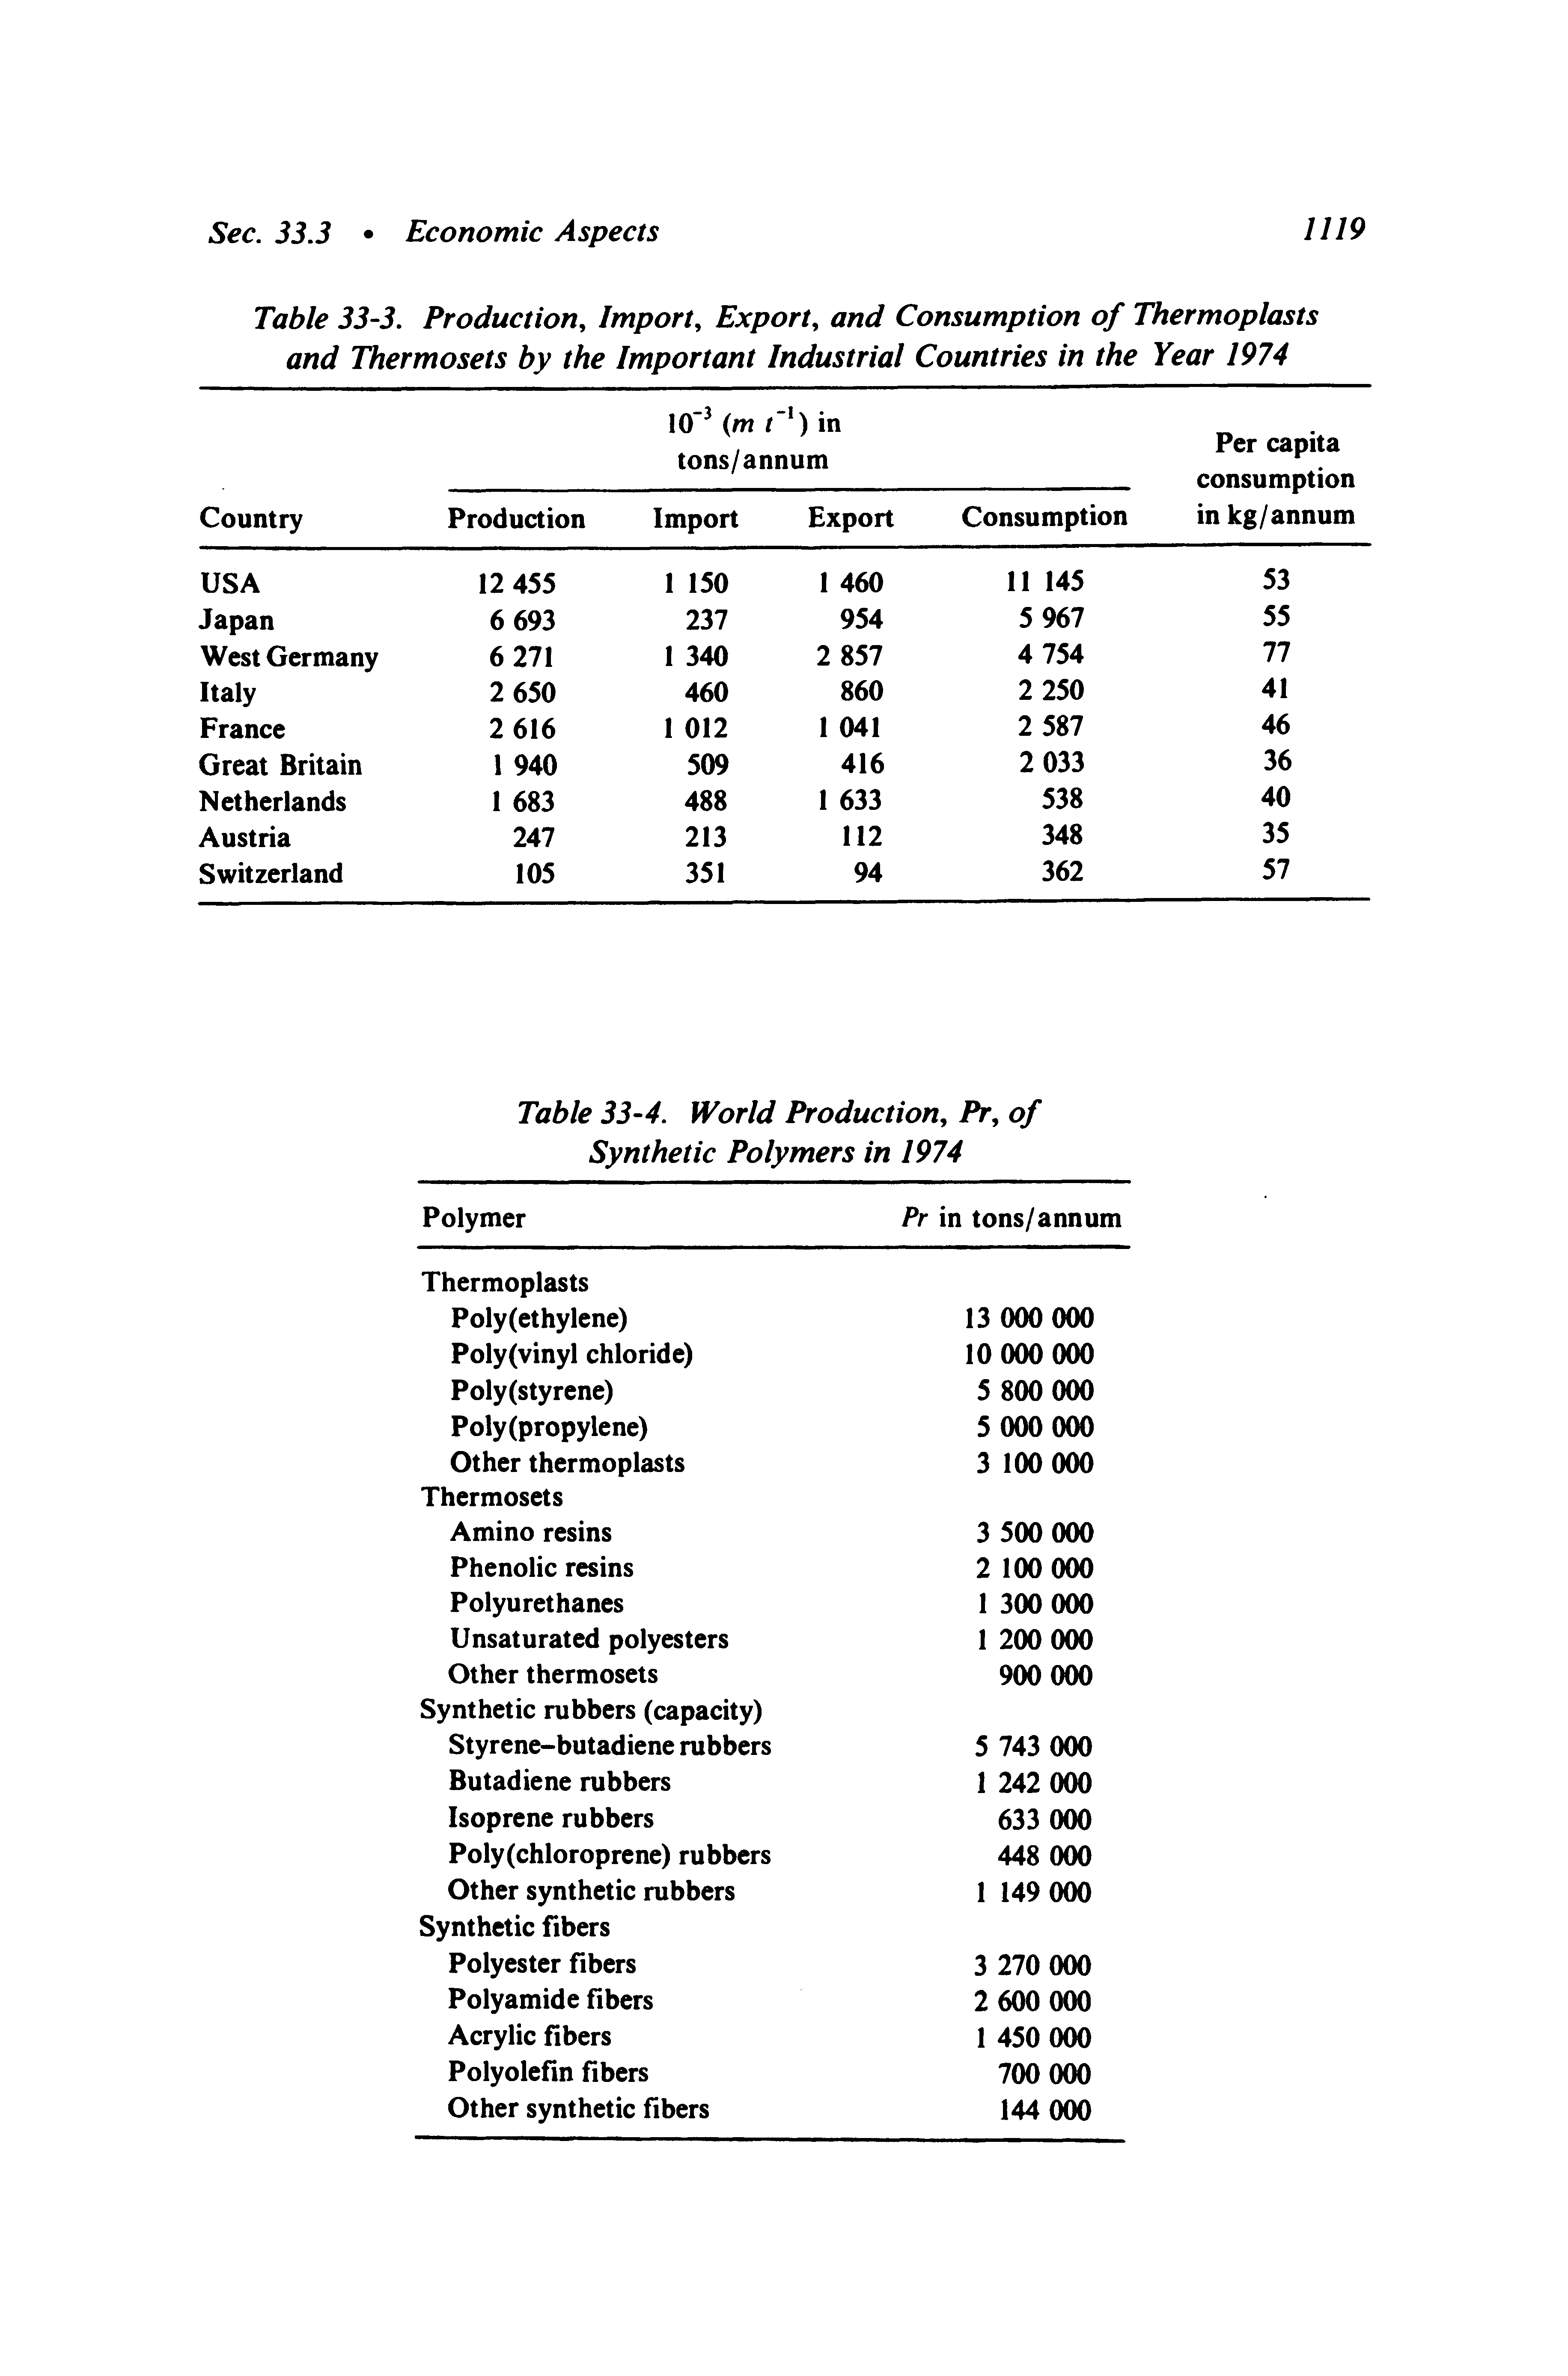 Table 33-3. Production, Import, Export, and Consumption of Thermoplasts and Thermosets by the Important Industrial Countries in the Year 1974...